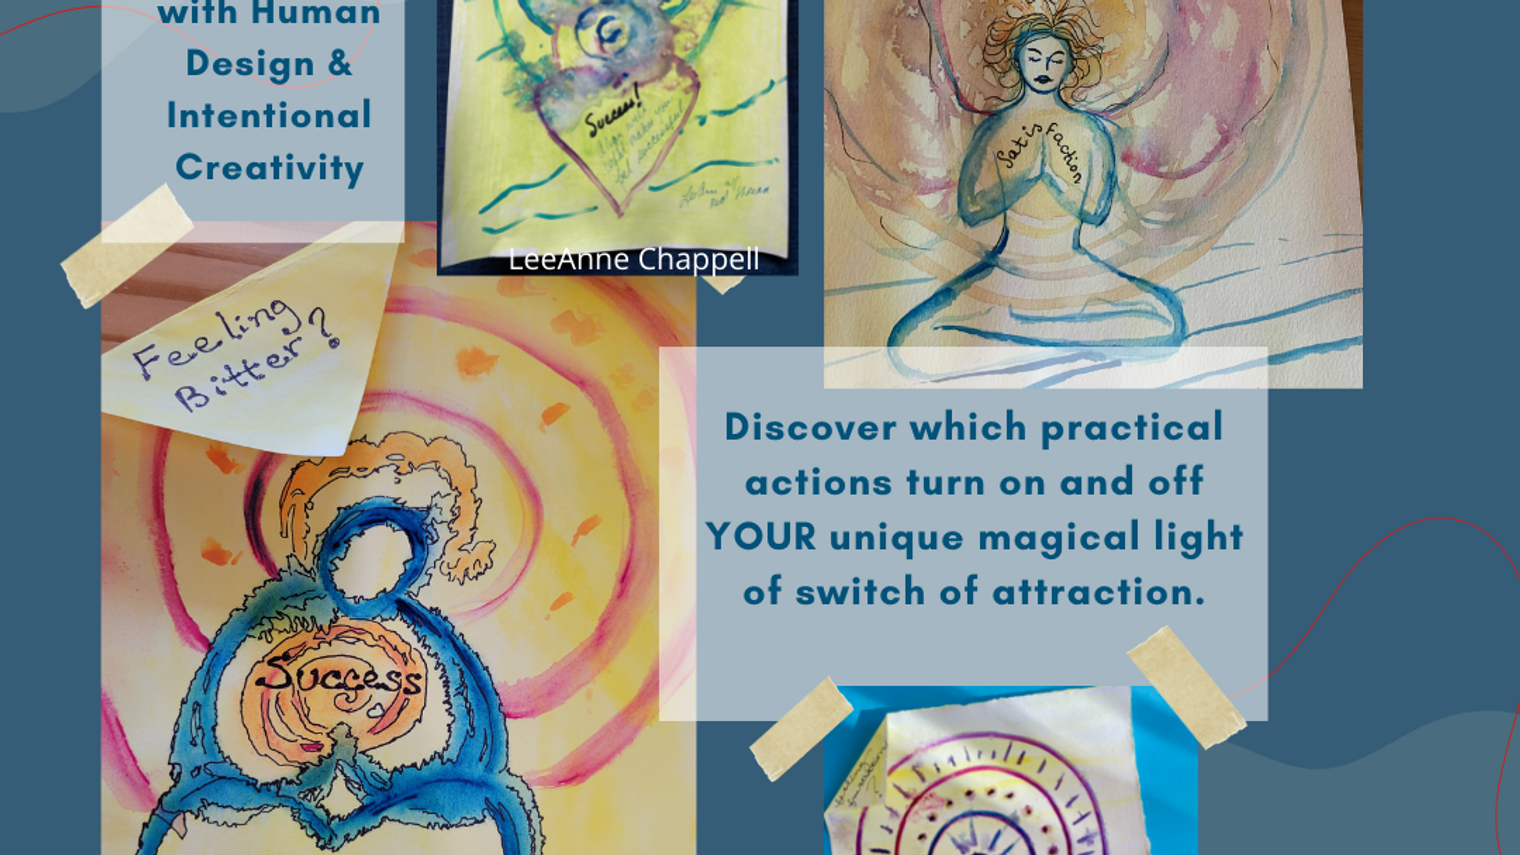 A Creative Exercise to Activate Your Magnetism, a Sneak Peek into Human Design & Intentional Creativity